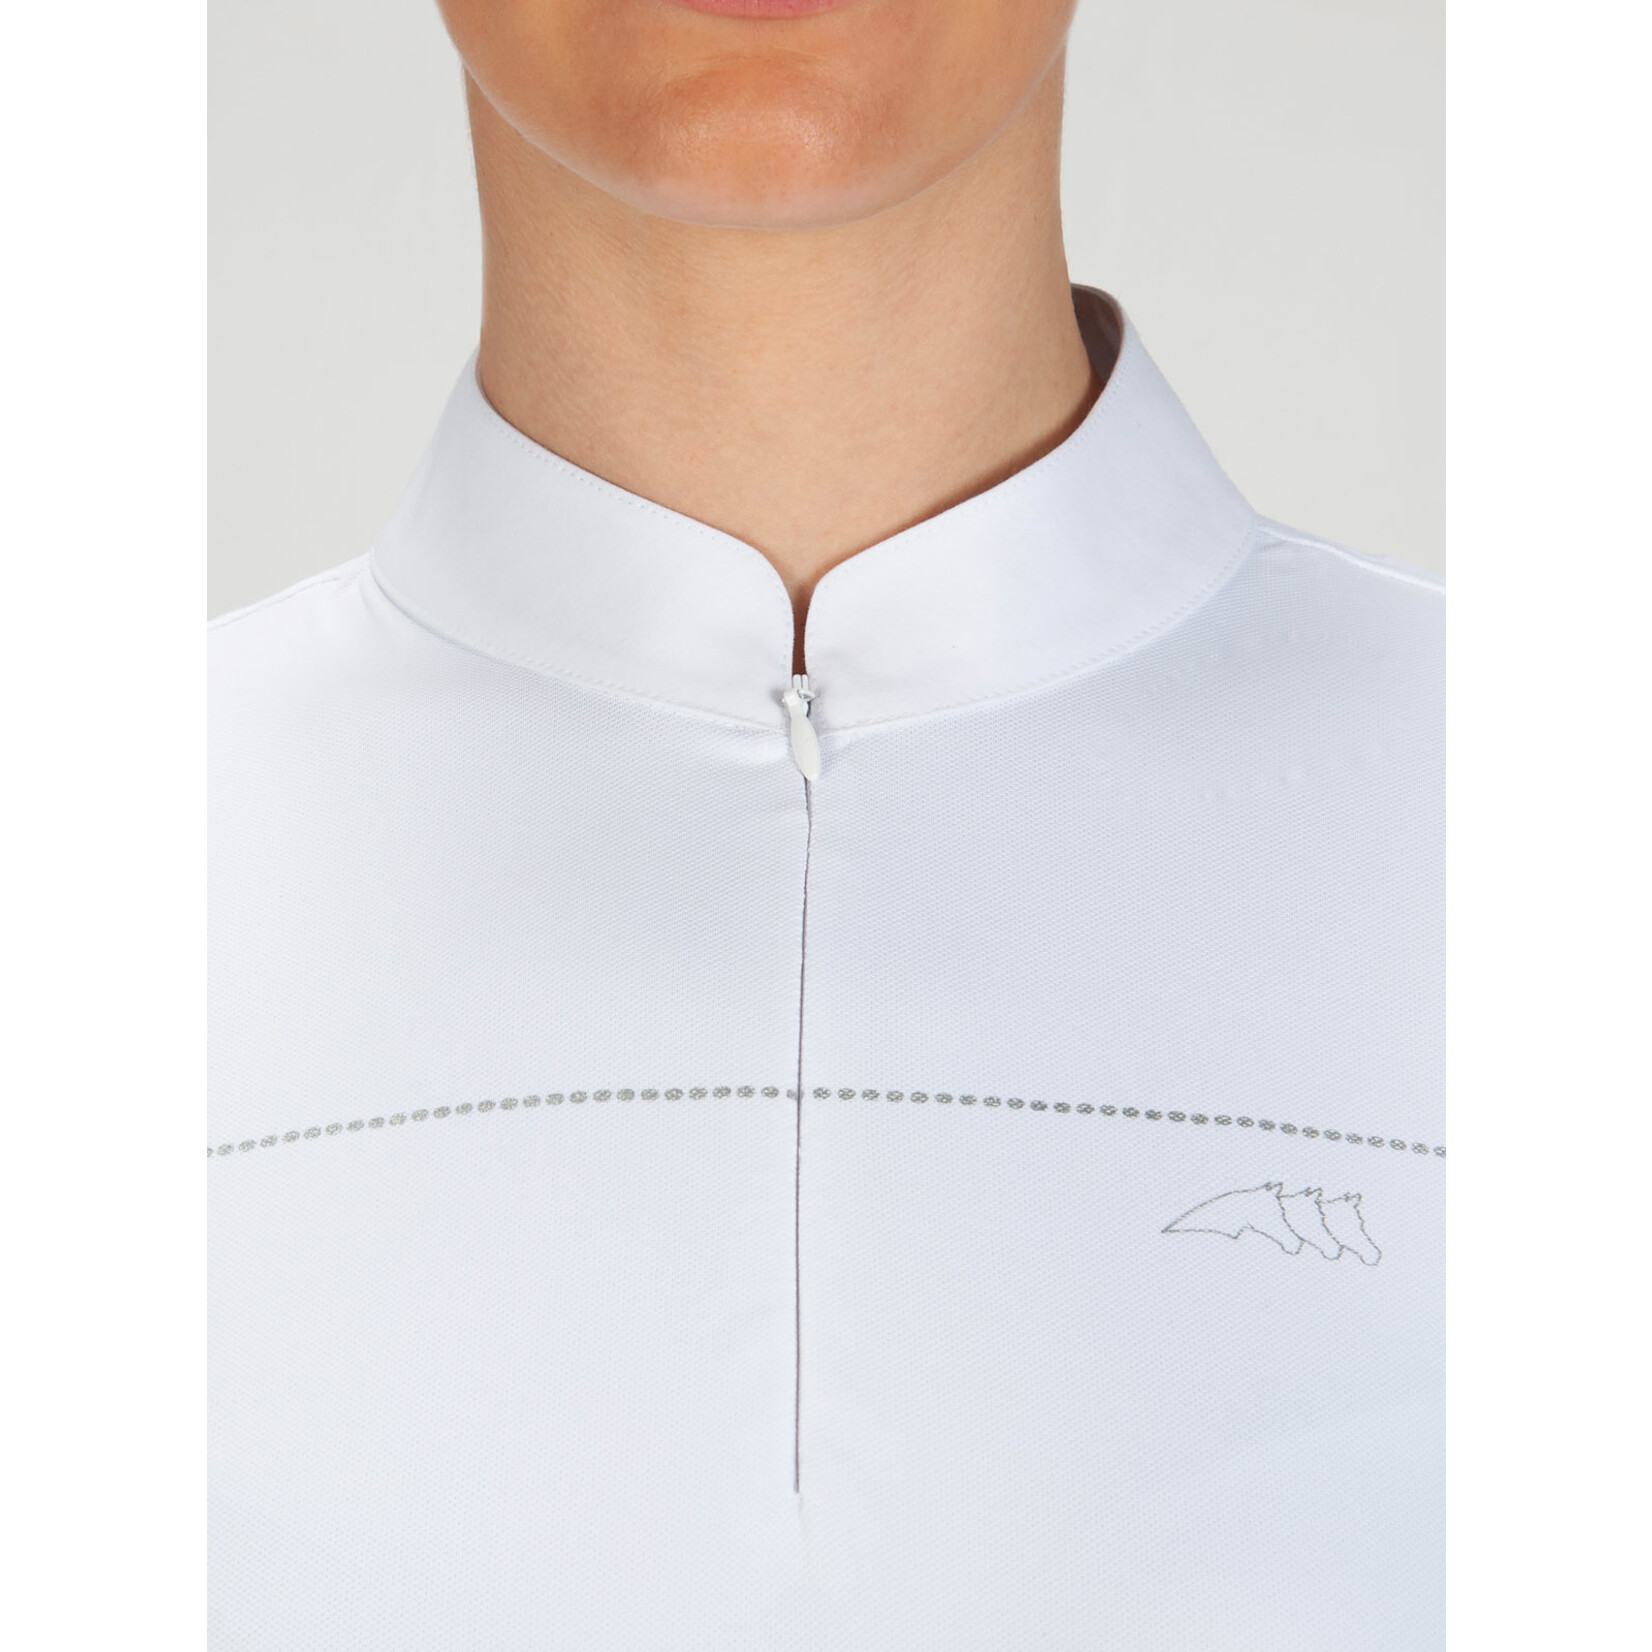 Equiline Equiline Catherine Short Sleeve